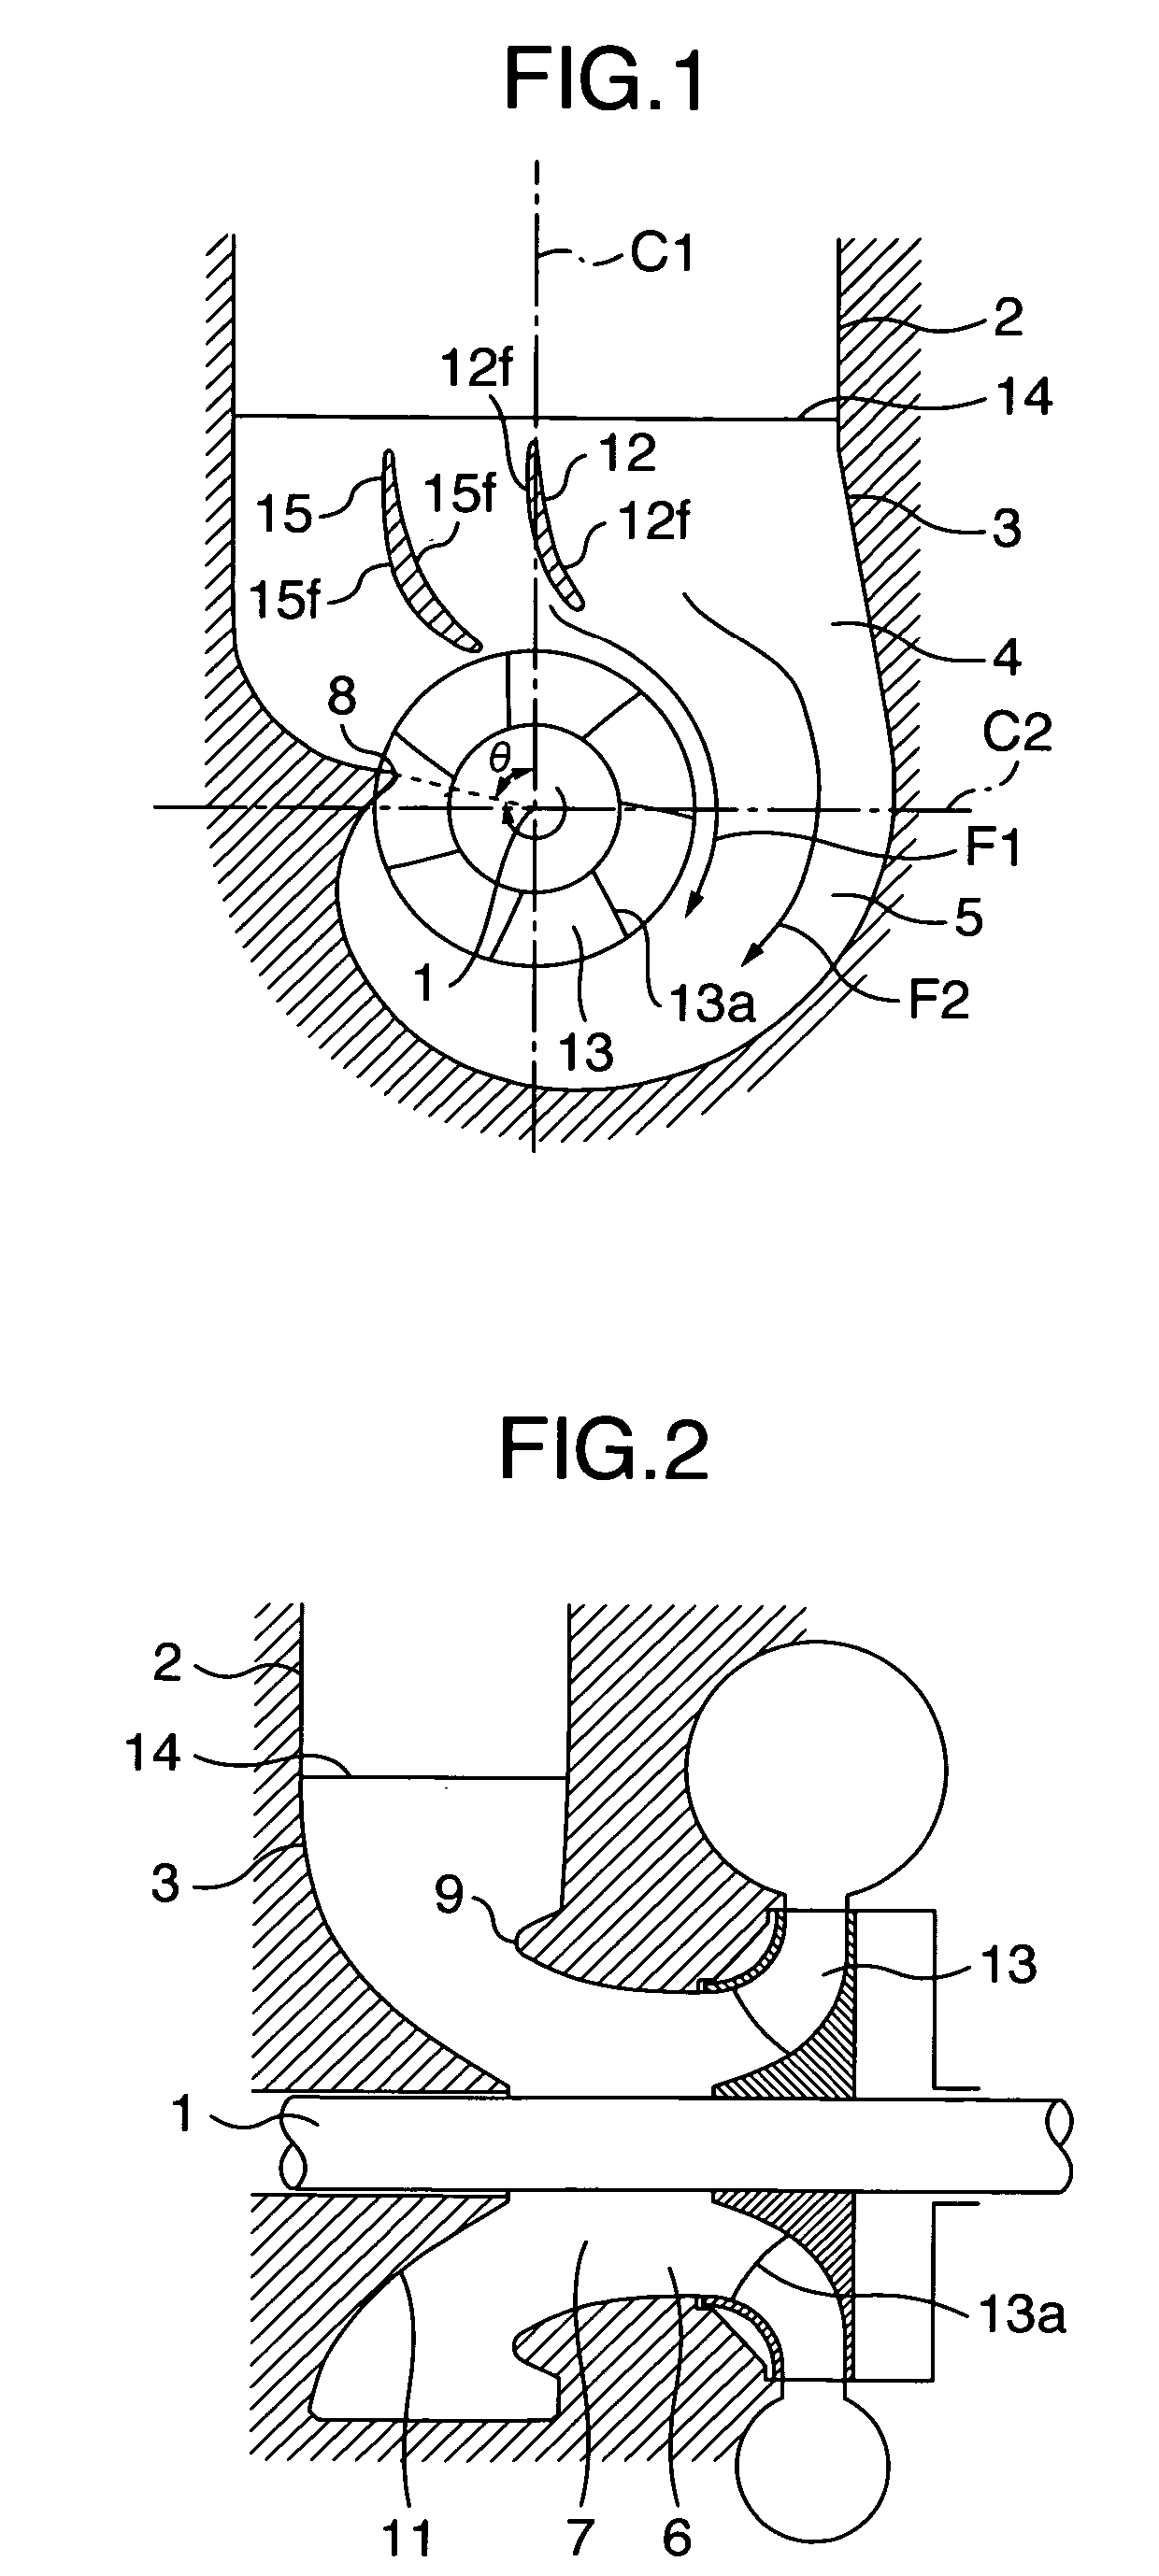 Inlet casing and suction passage structure